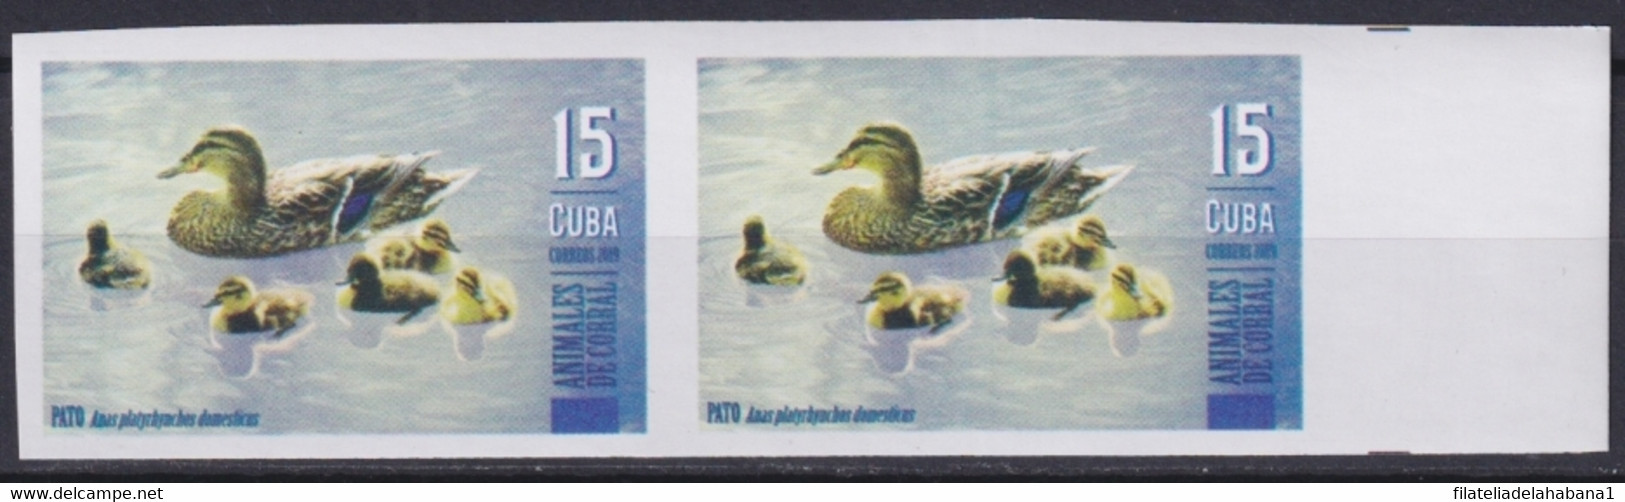 2019.196 CUBA MNH 2019 IMPERFORATED PROOF 90c ANIMALES DE CORRAL BIRD AVES DUCK PATOS. - Imperforates, Proofs & Errors